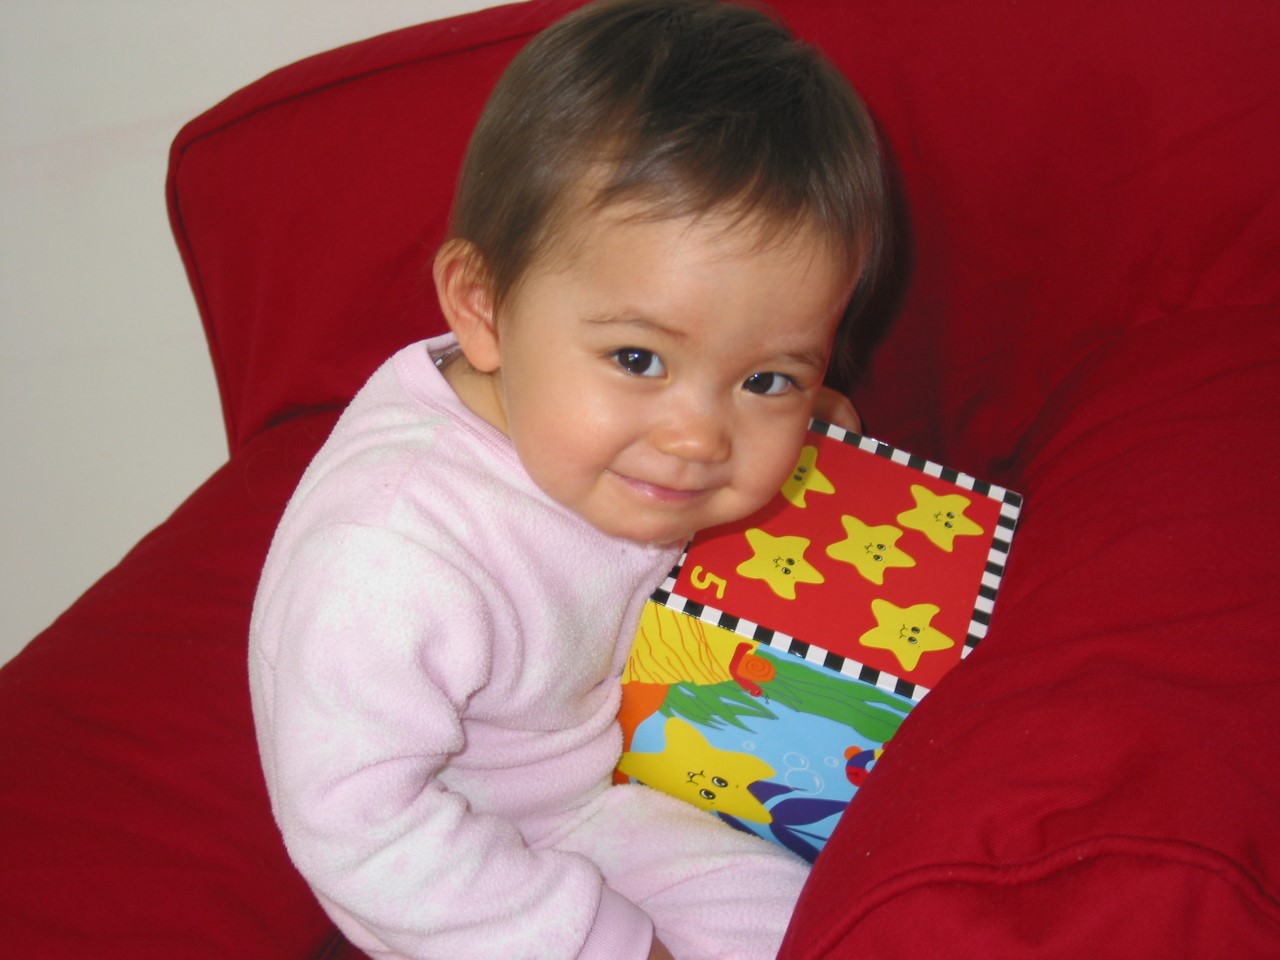 Baby Bella sits in a red beanbag chair, wearing a pink onesie and looking up from a large toy block